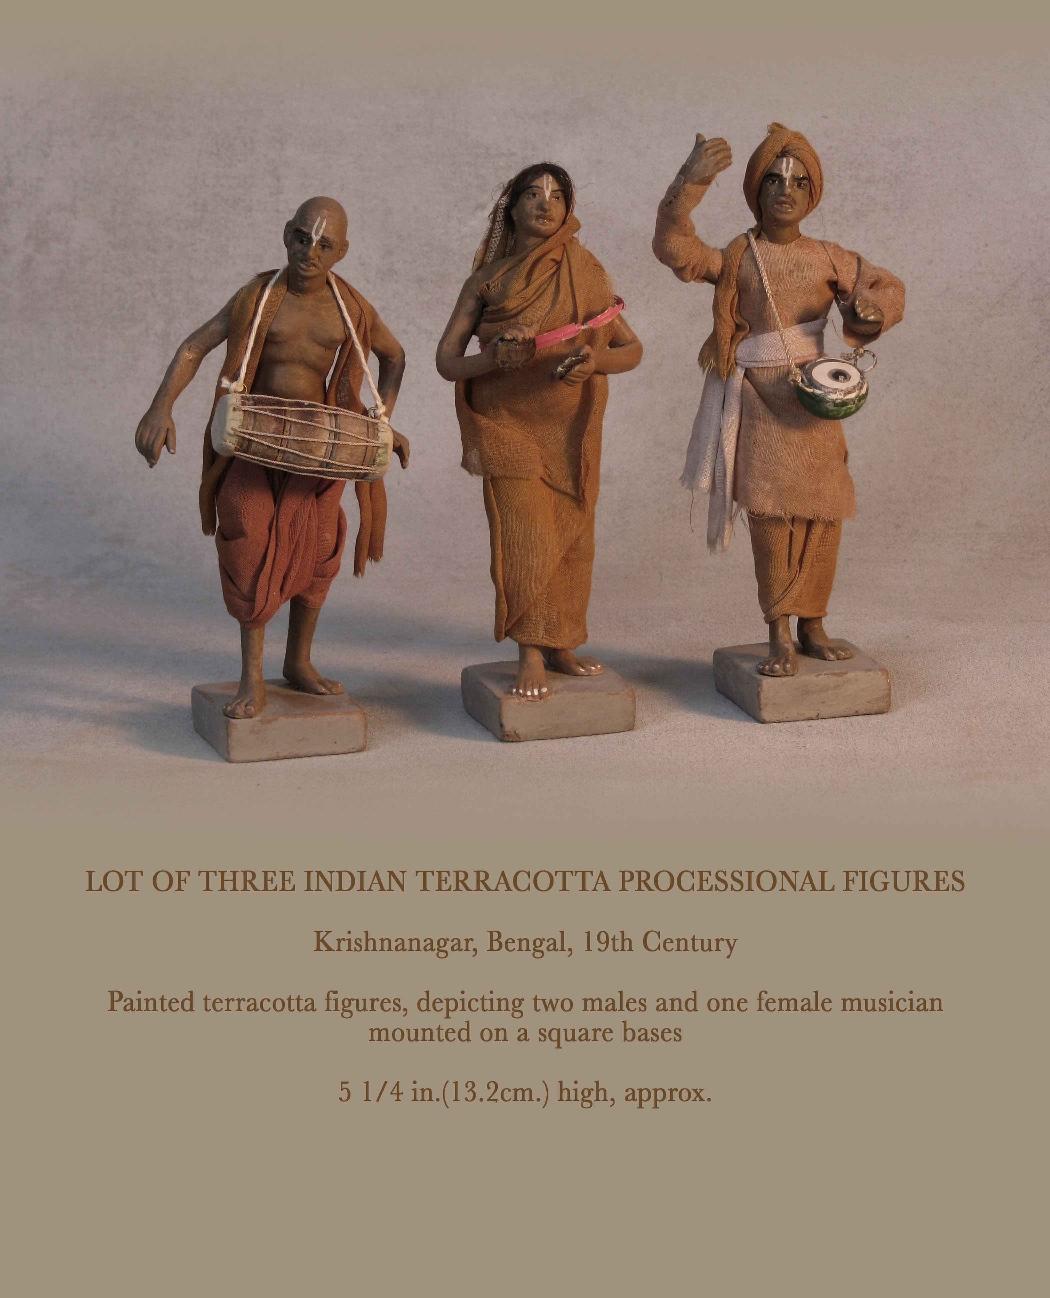 Lot of three Indian terracotta processional figures.

Krishnanagar, Bengal, 19th Century.

Painted terracotta figures, depicting two males and one female musician
mounted on a square bases.

Measure: 5 1/4